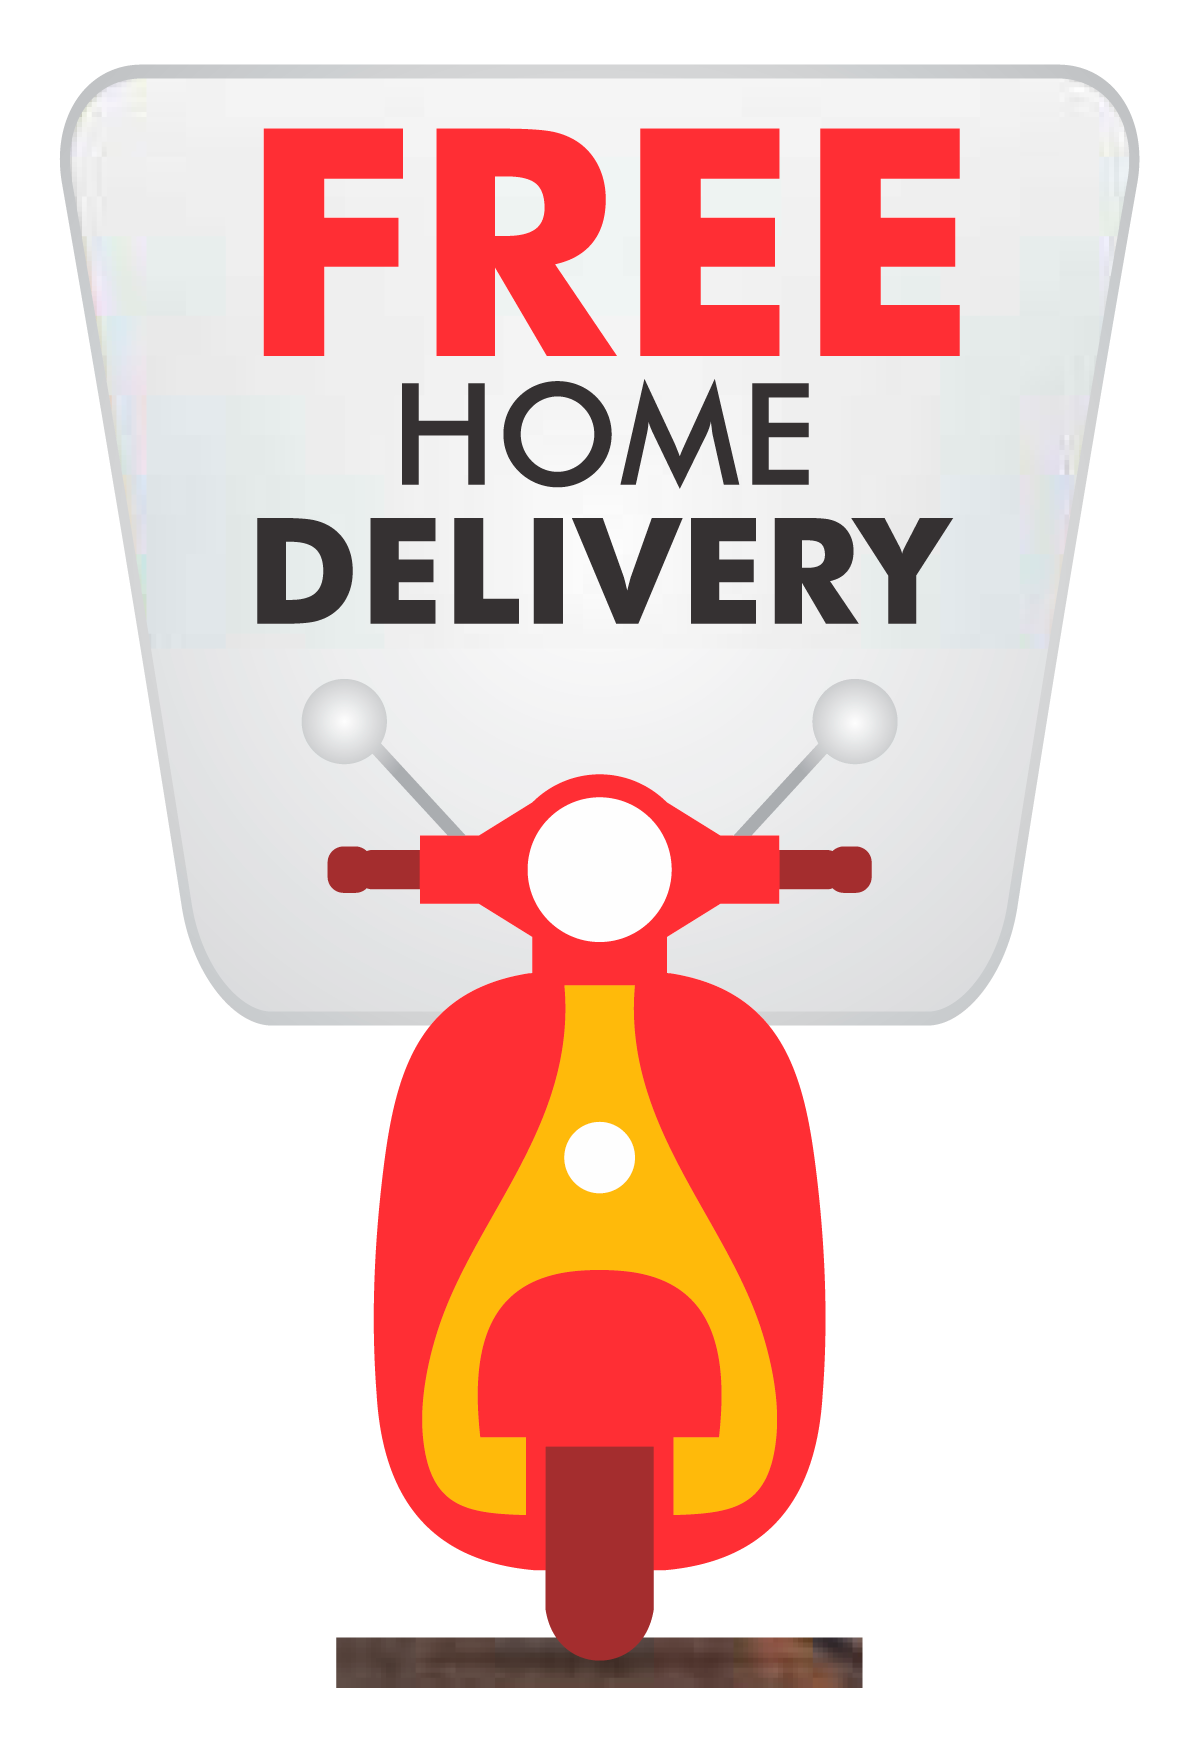 Home Delivery Logo Stock Photos and Images - 123RF